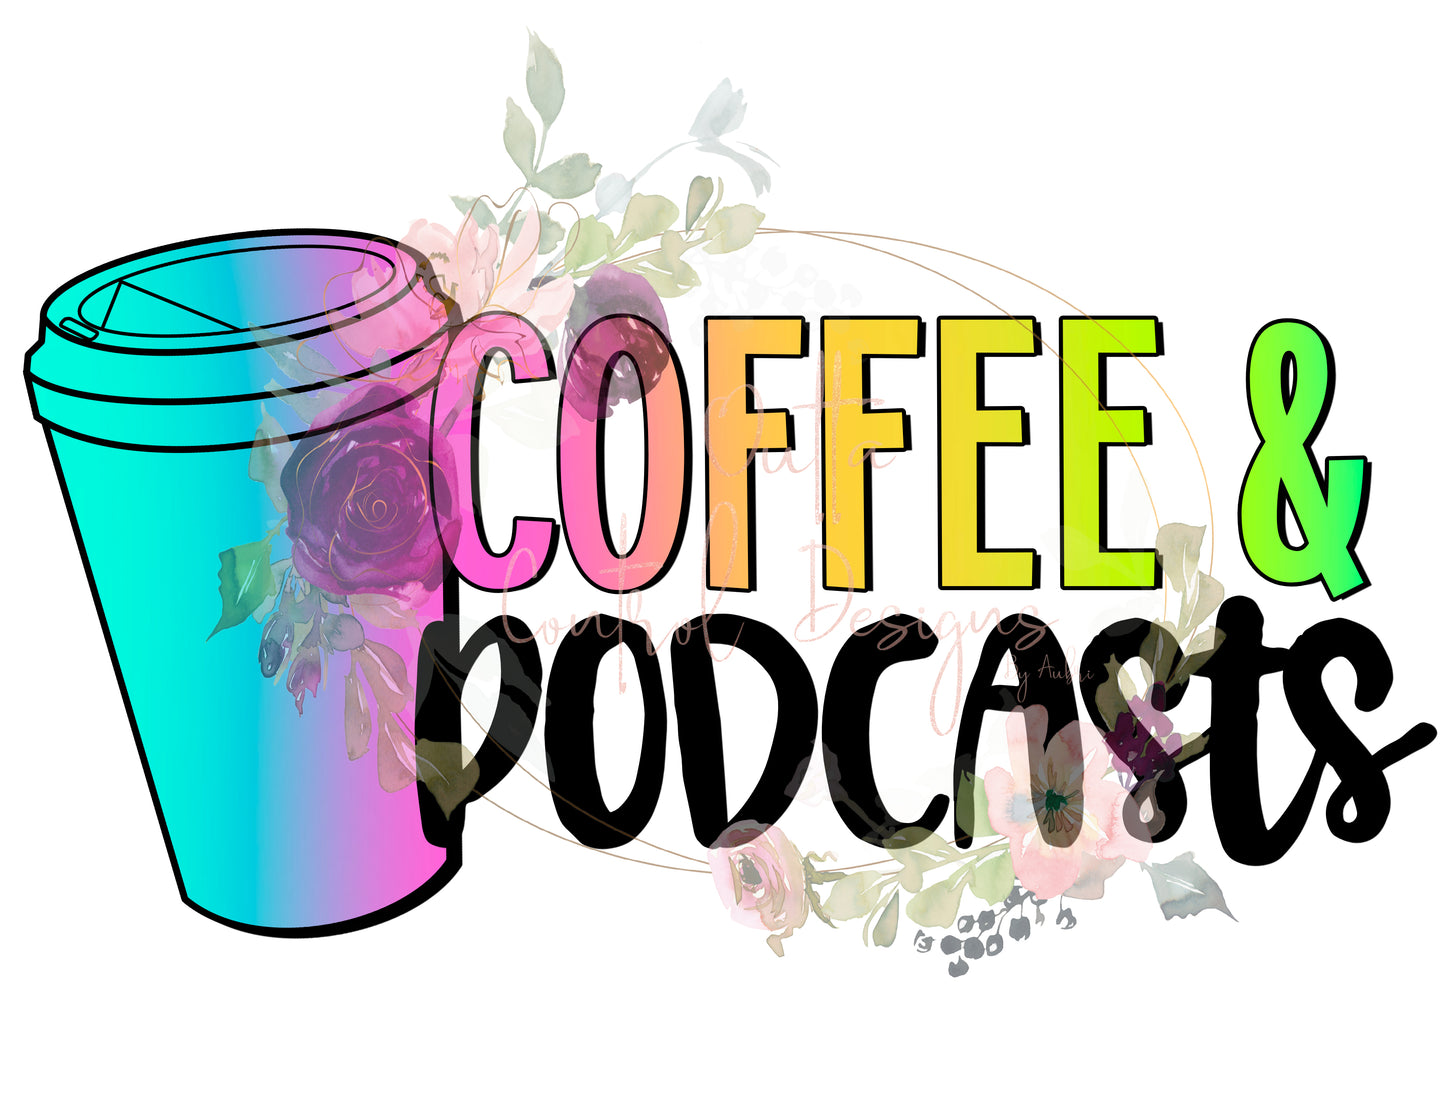 Coffee and Podcasts Ready To Press Sublimation Transfer